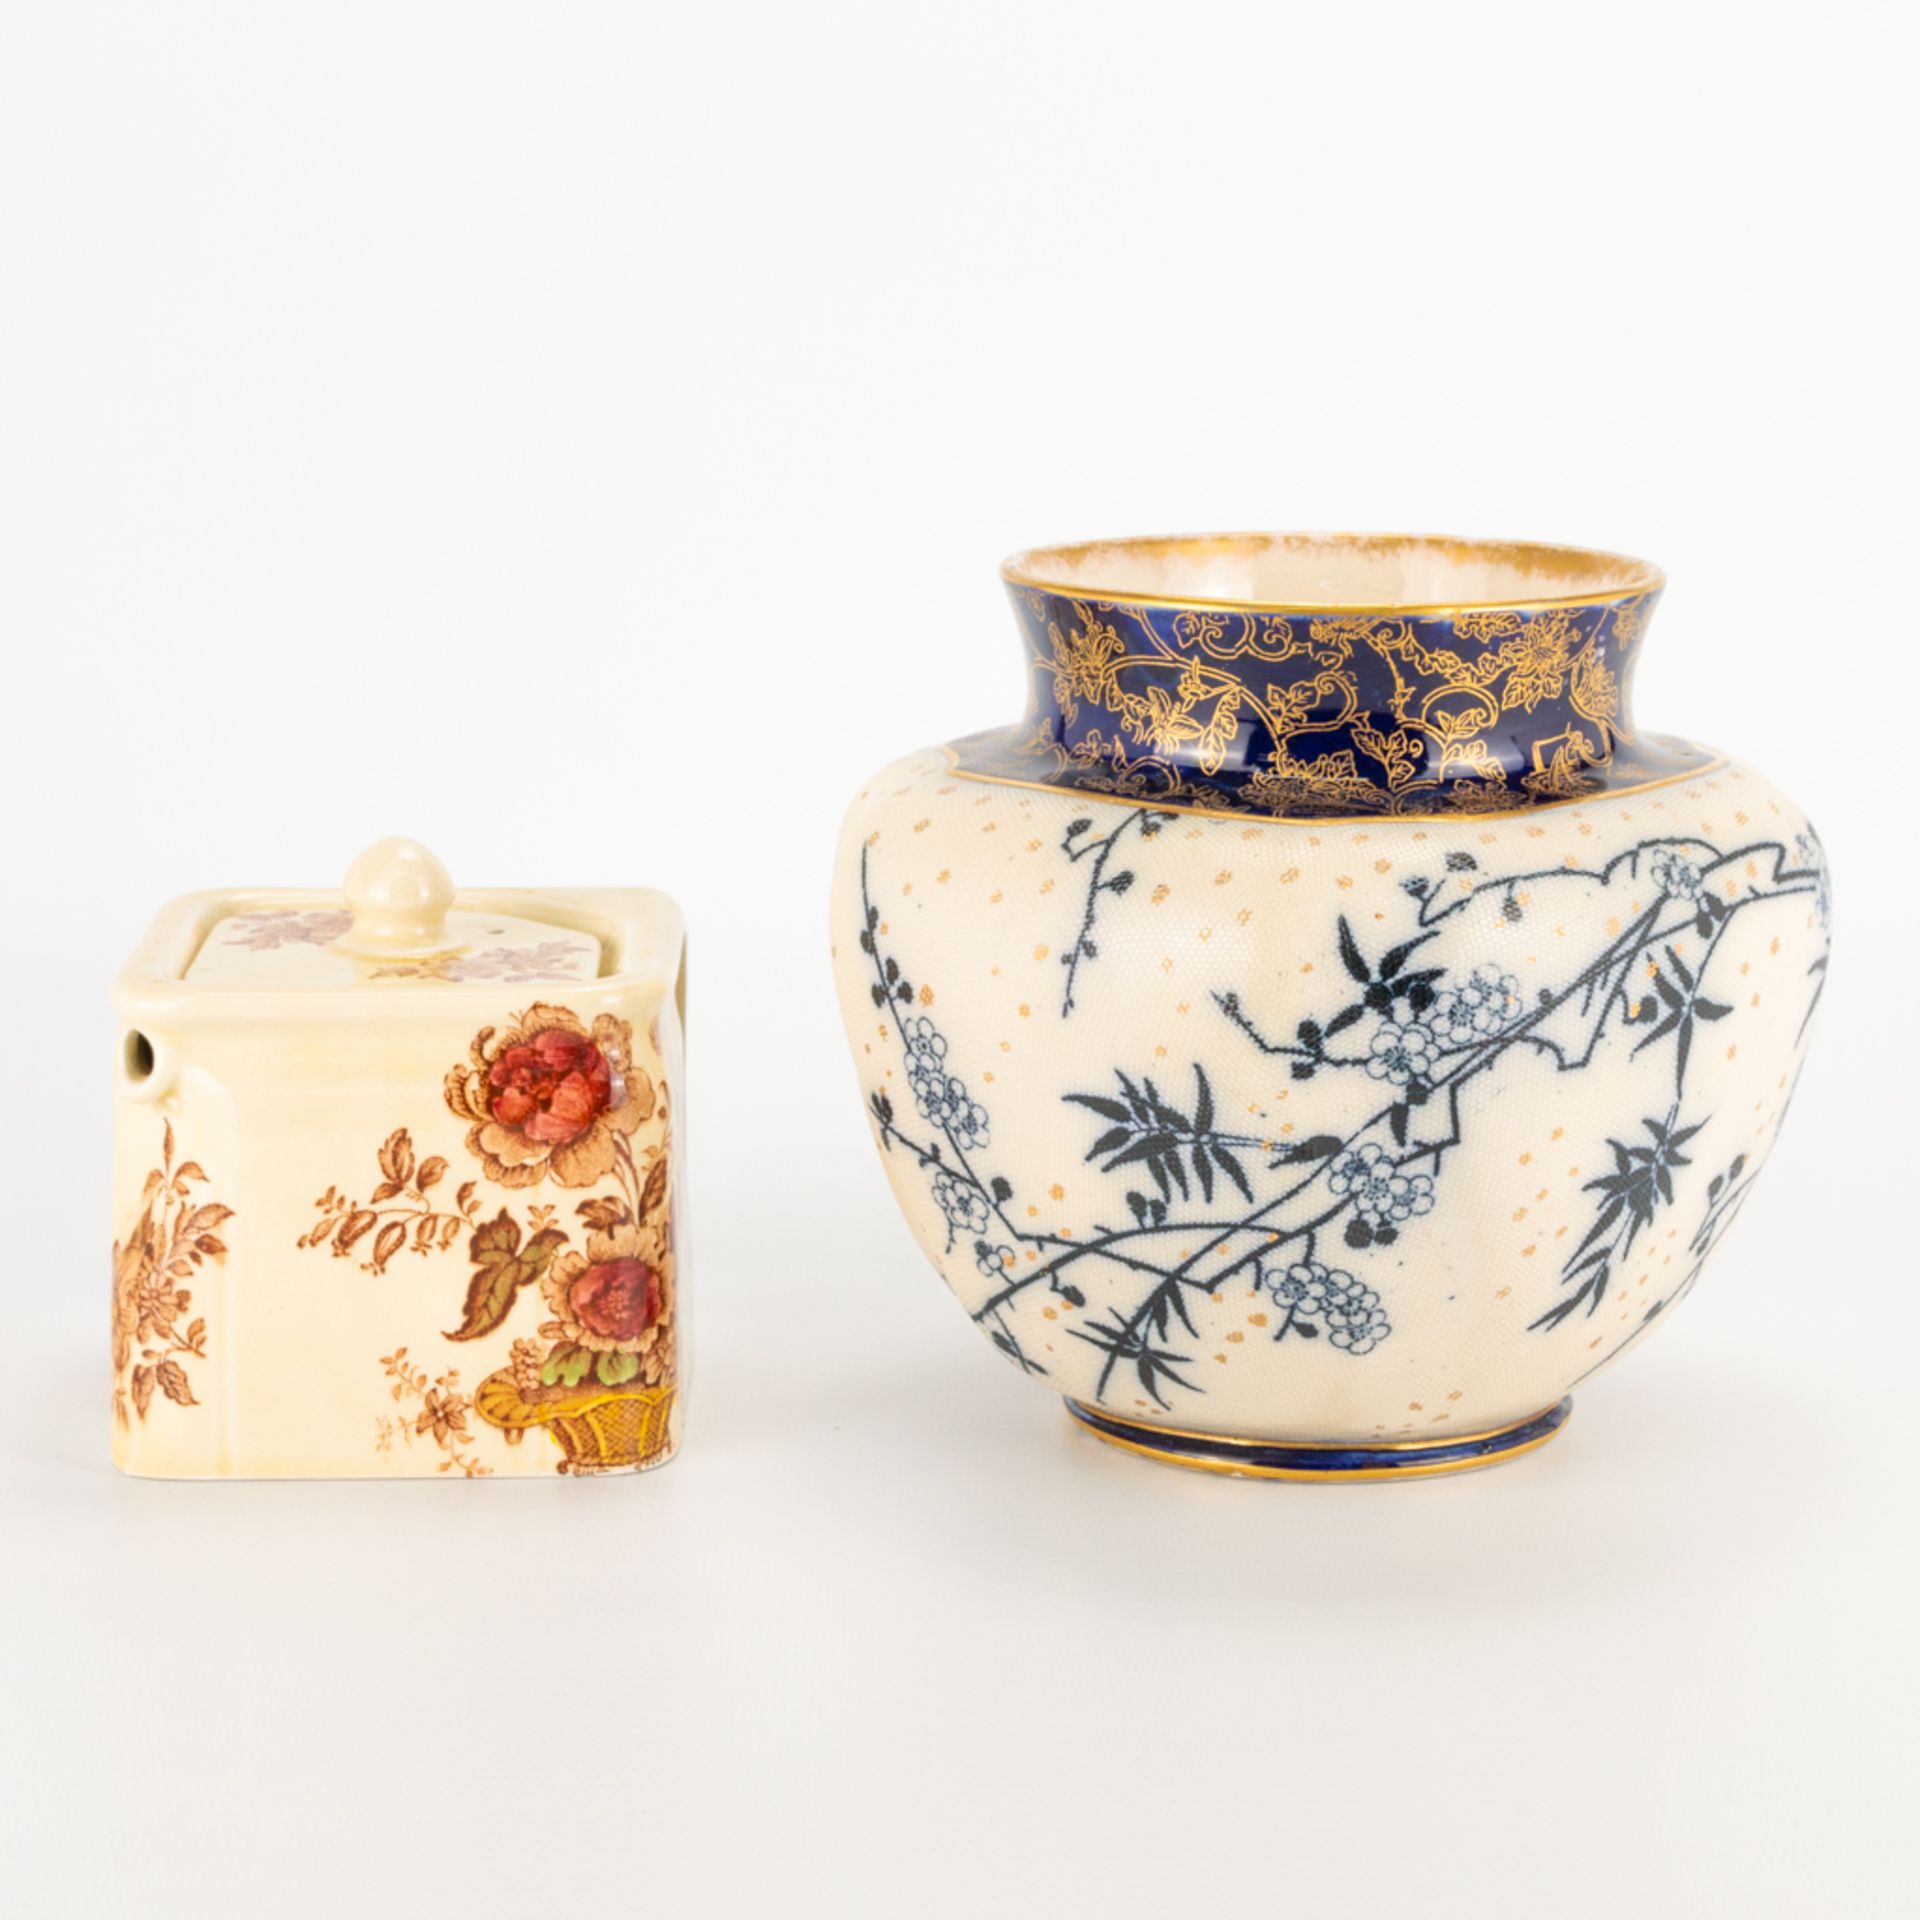 A collection of 2 pieces of English porcelain, a vase made by Doulton and a tea pot made by Clarice - Image 7 of 17